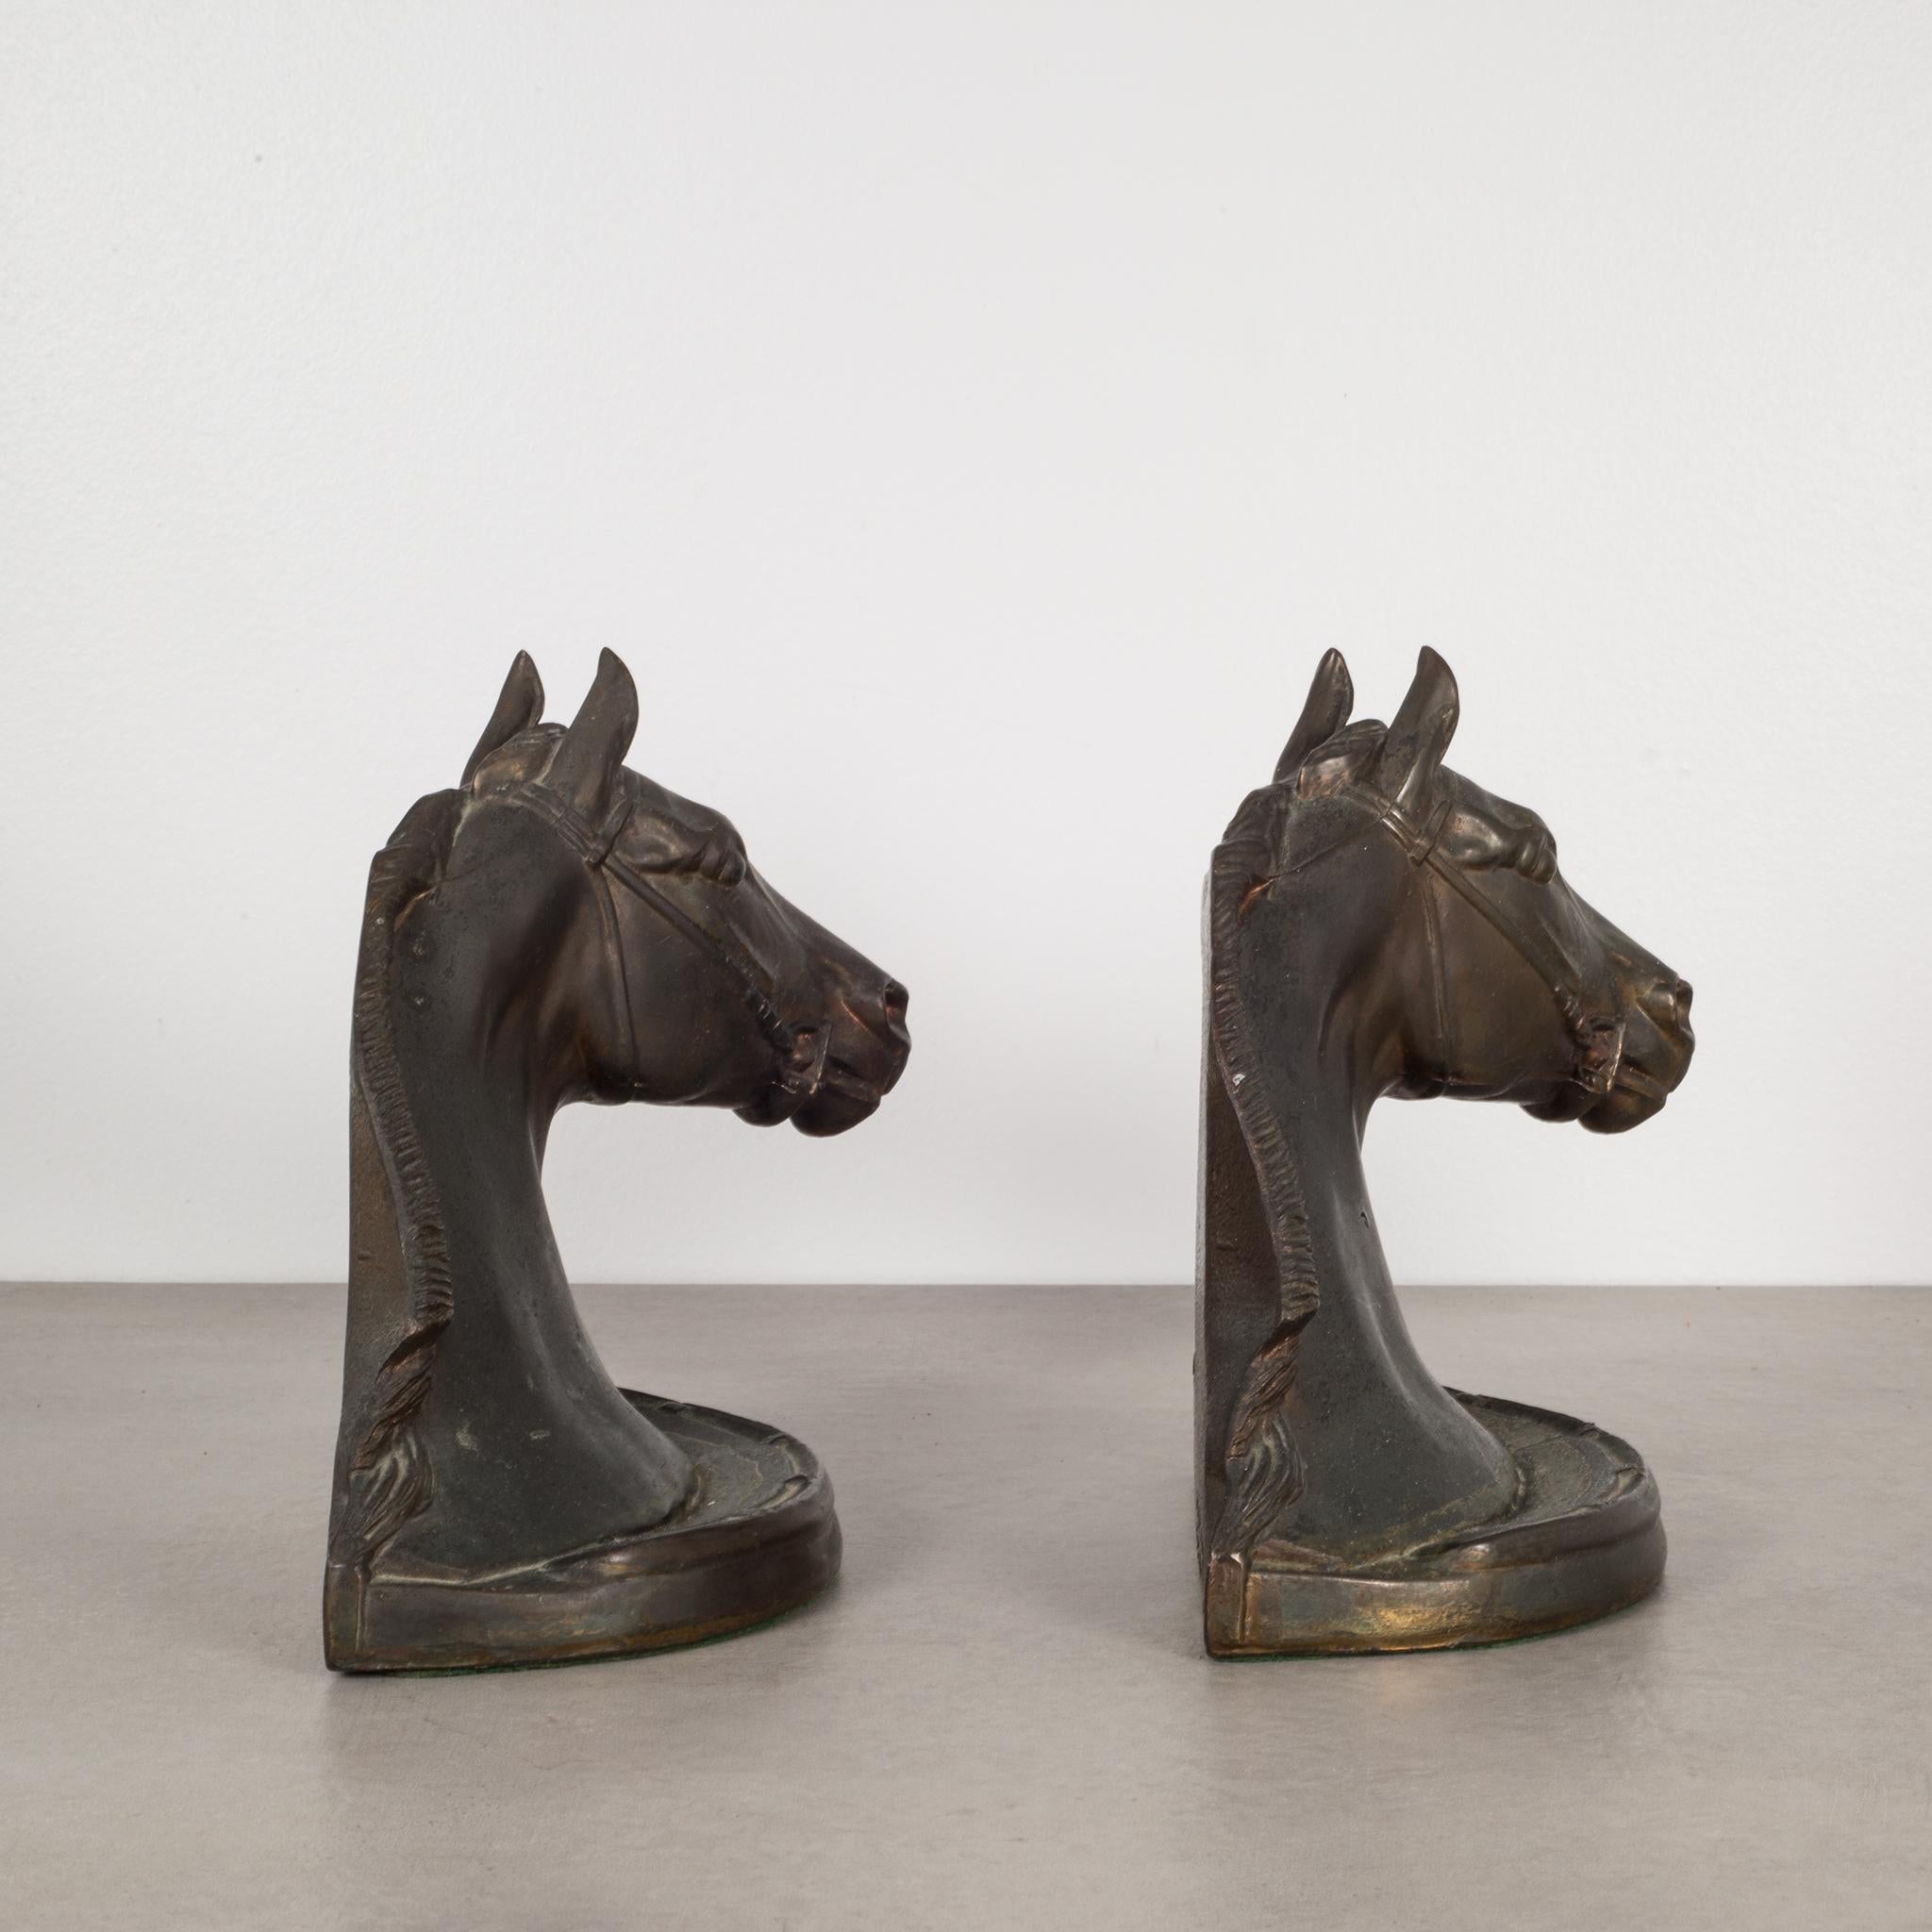 Art Deco Pot Metal Horse Head Bookends by Gladys Brown for Dodge Inc., circa 1930